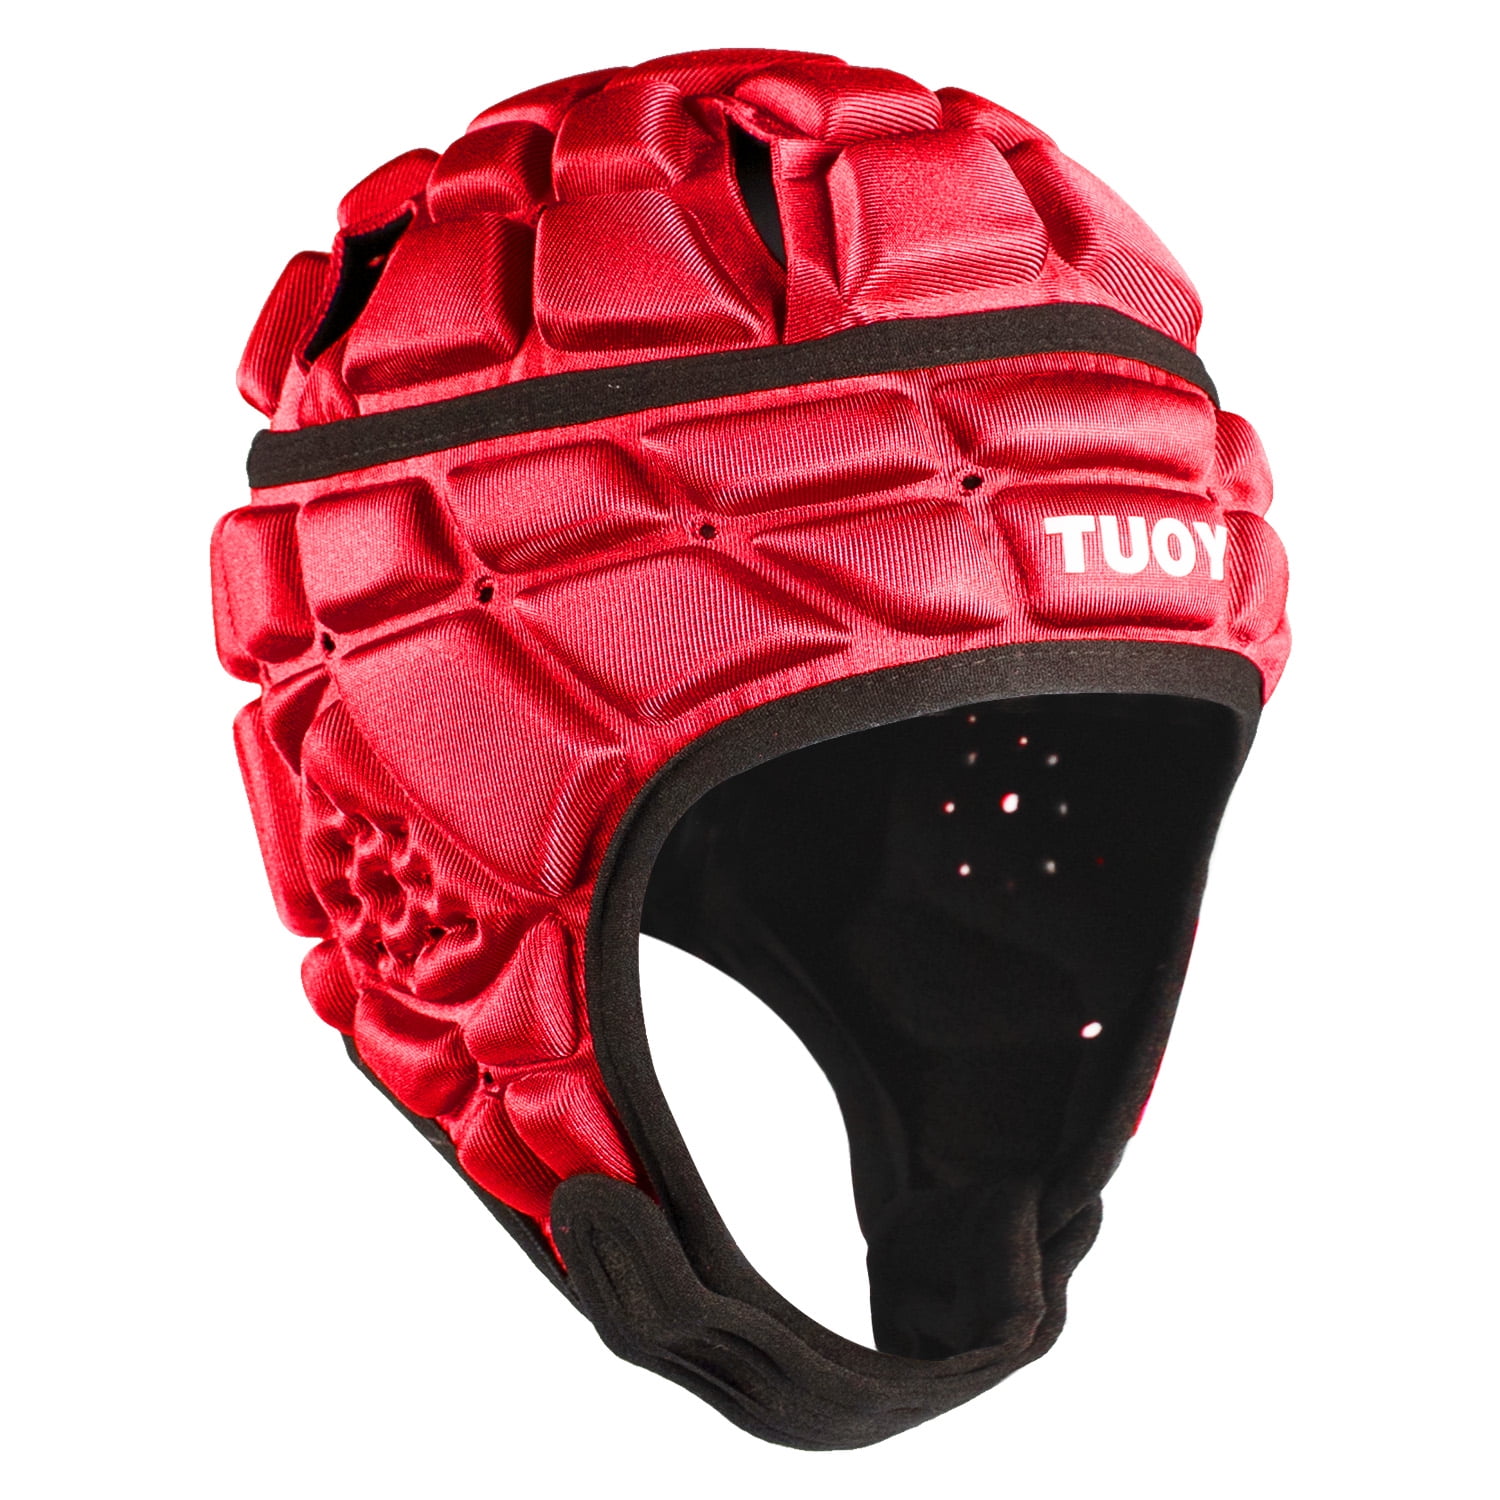 Details about   Boxing Headgear Junior Helmet Protector in Professional Training for kids 1121 